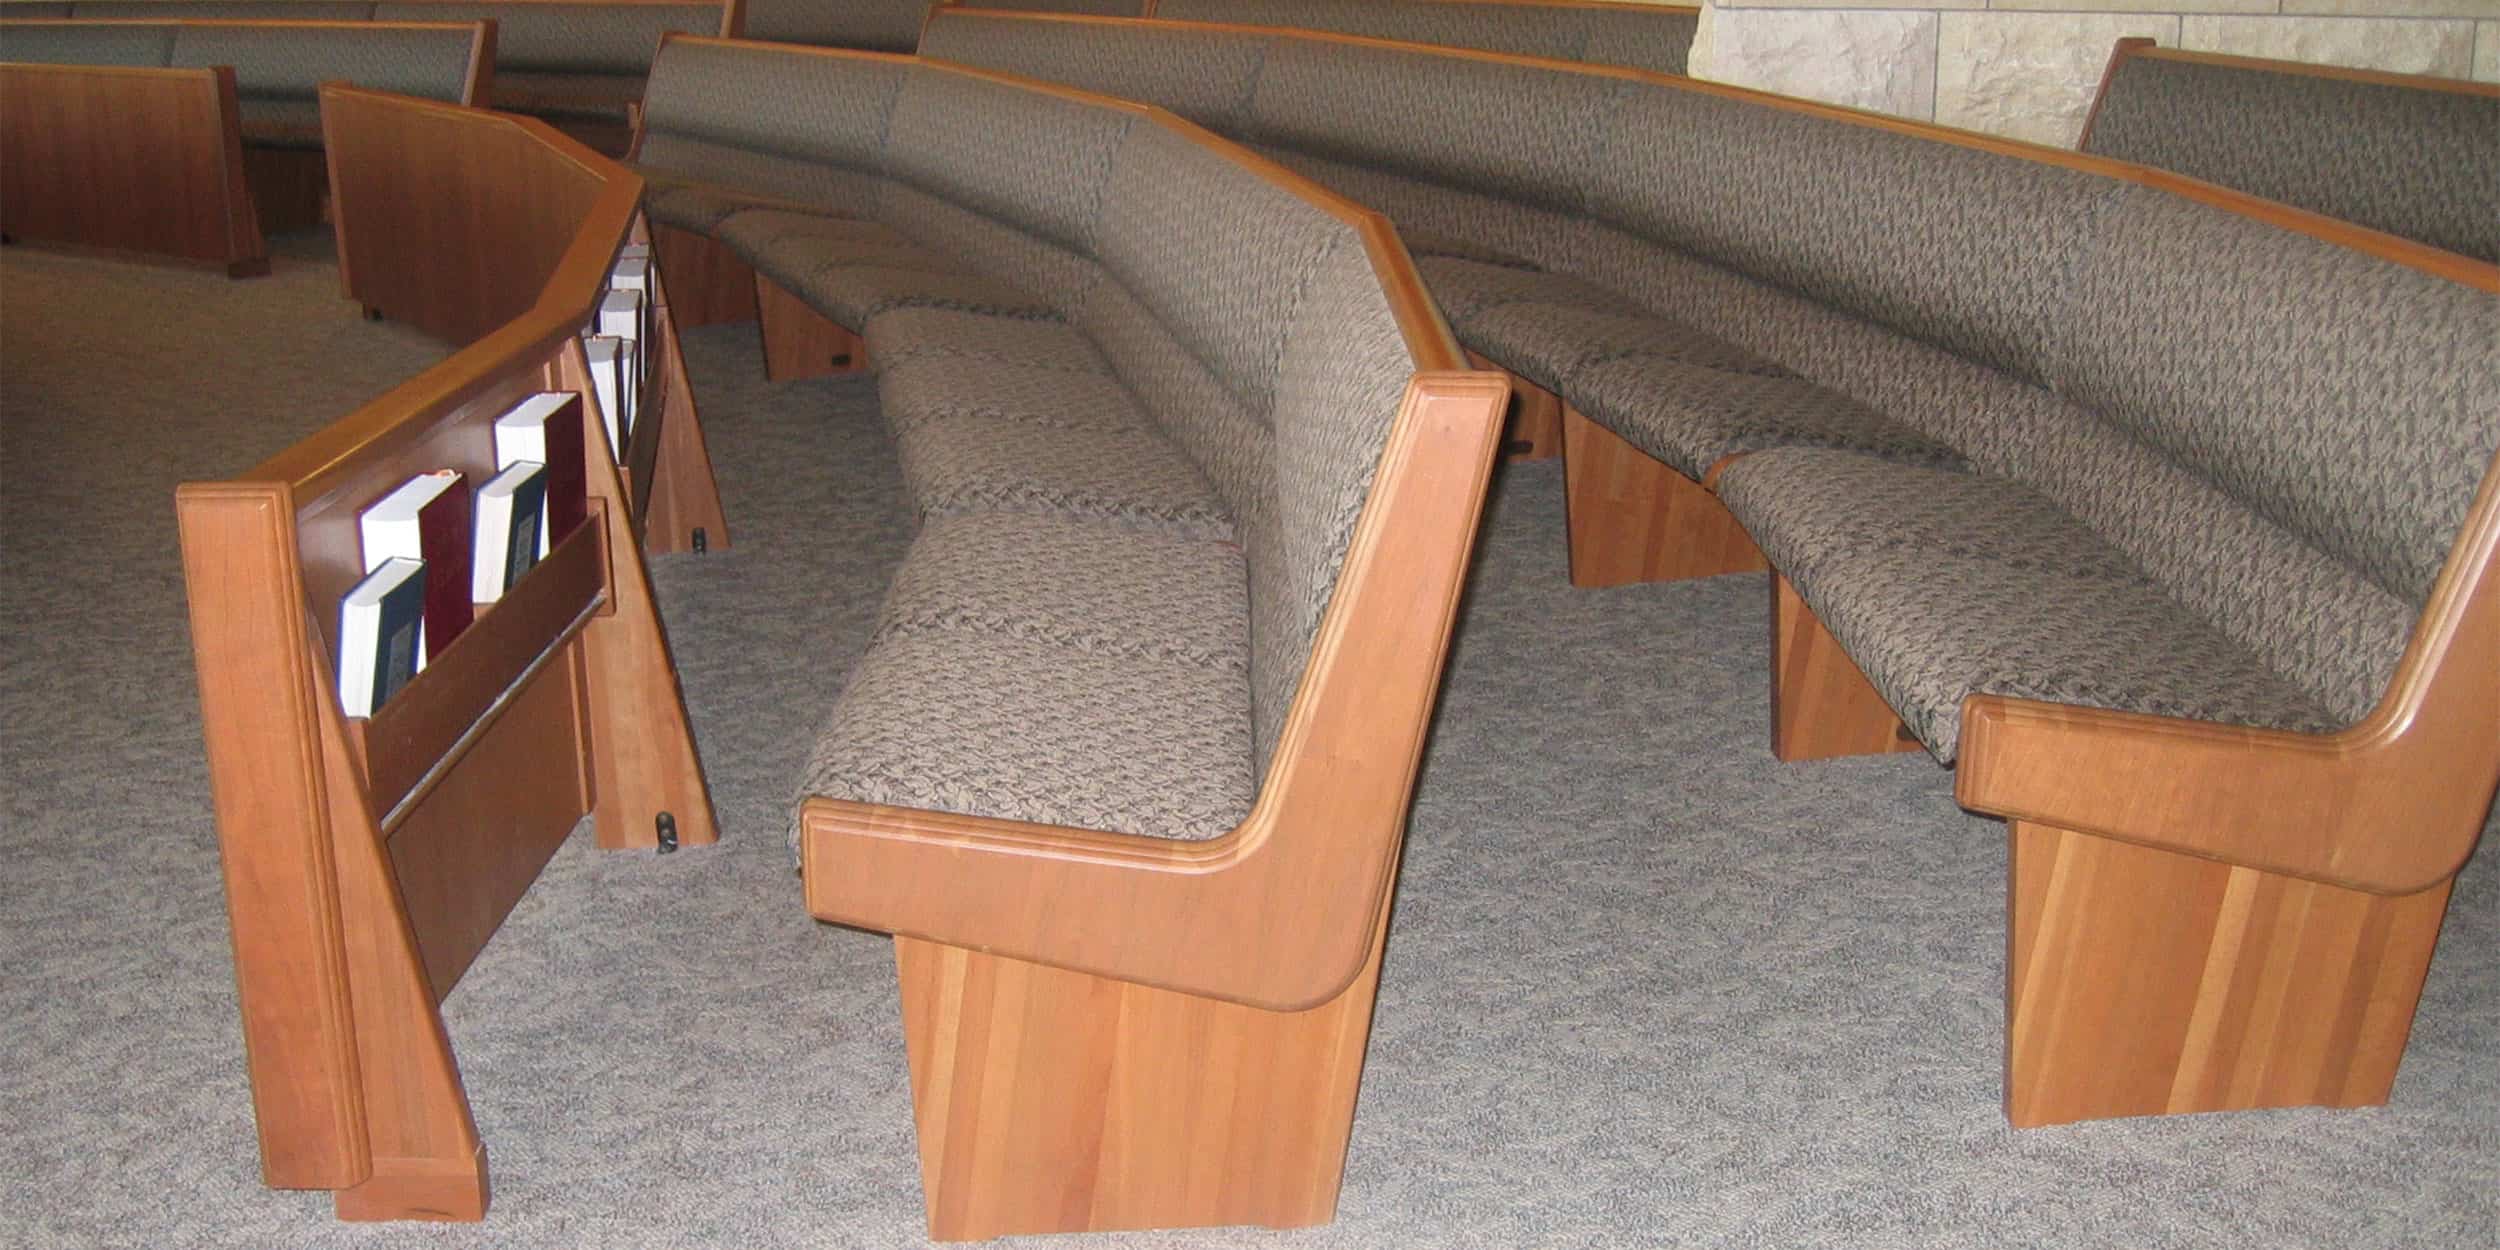 Mitered Pews with Individual Definity Seats from Sauder Worship Seating